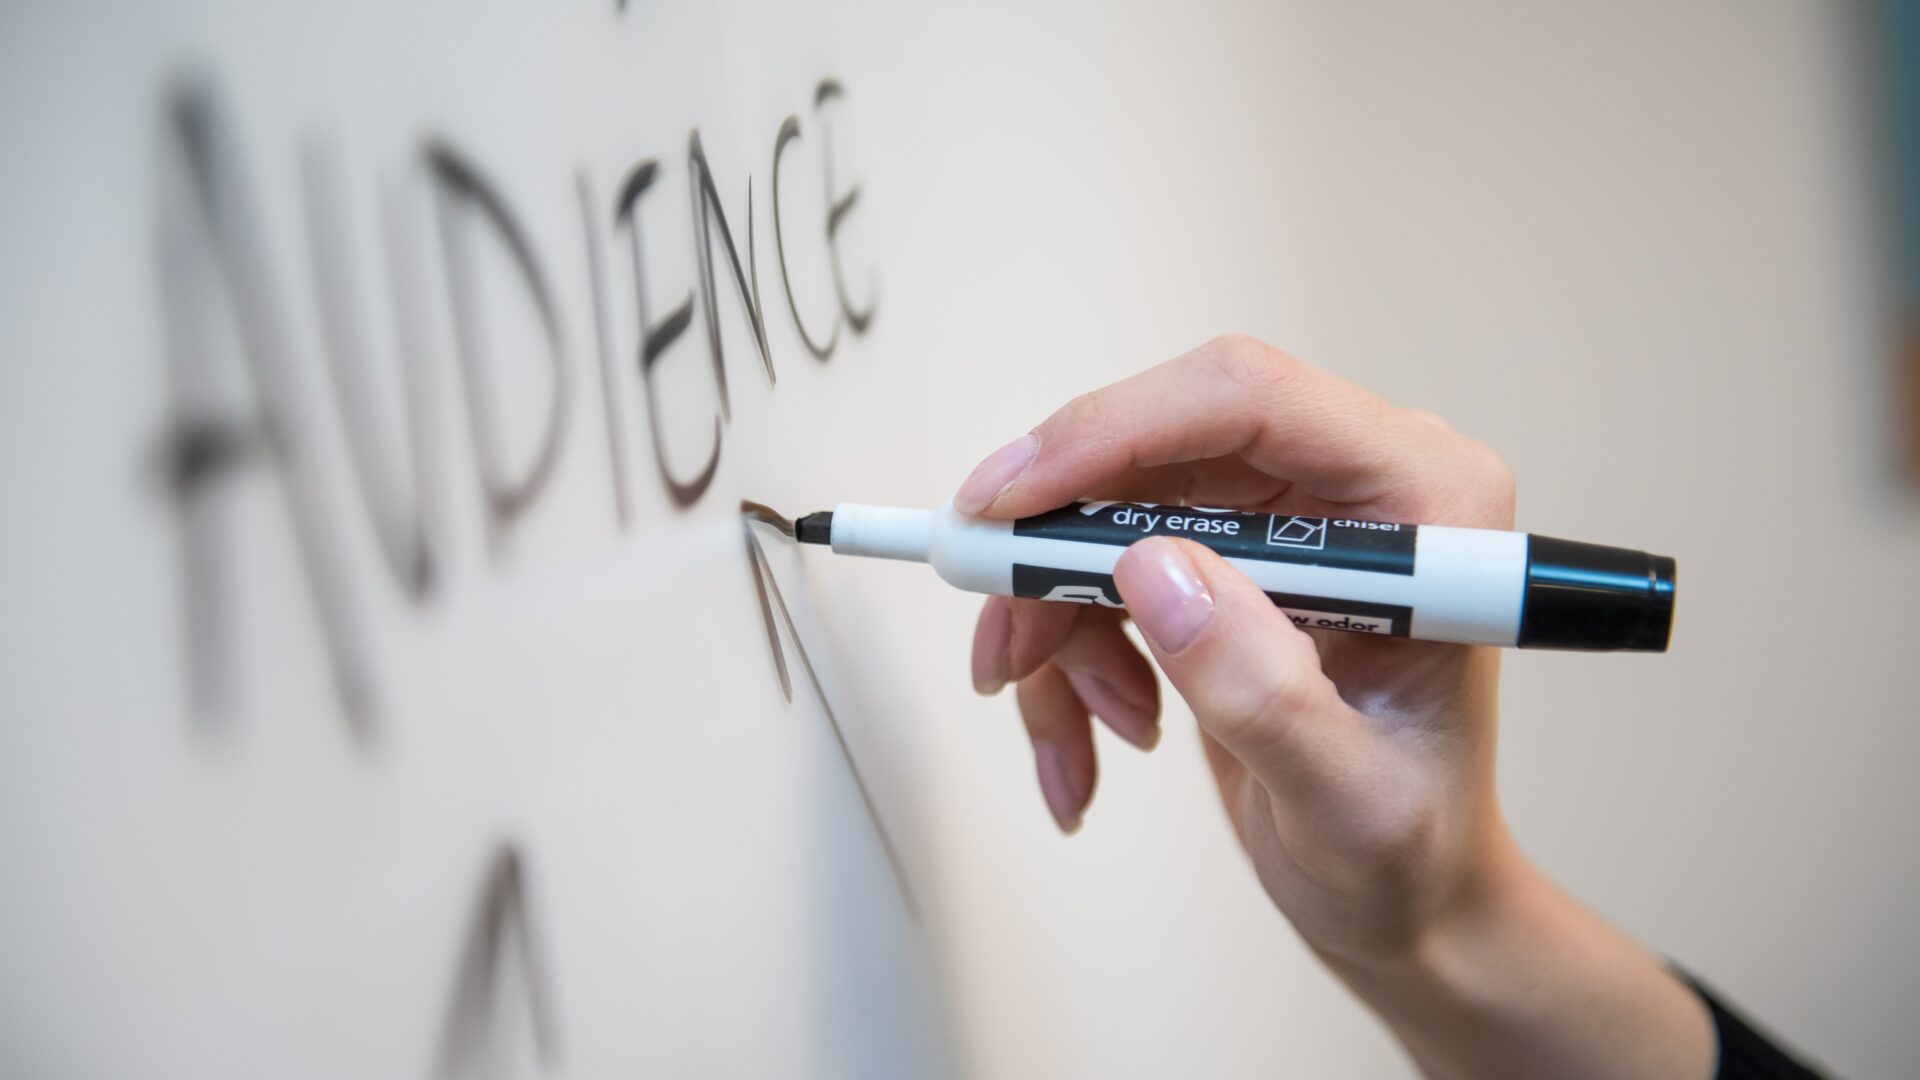 real estate agent writing the word "audience" on a white board trying to map out a marketing strategy to target the right audience at the right time